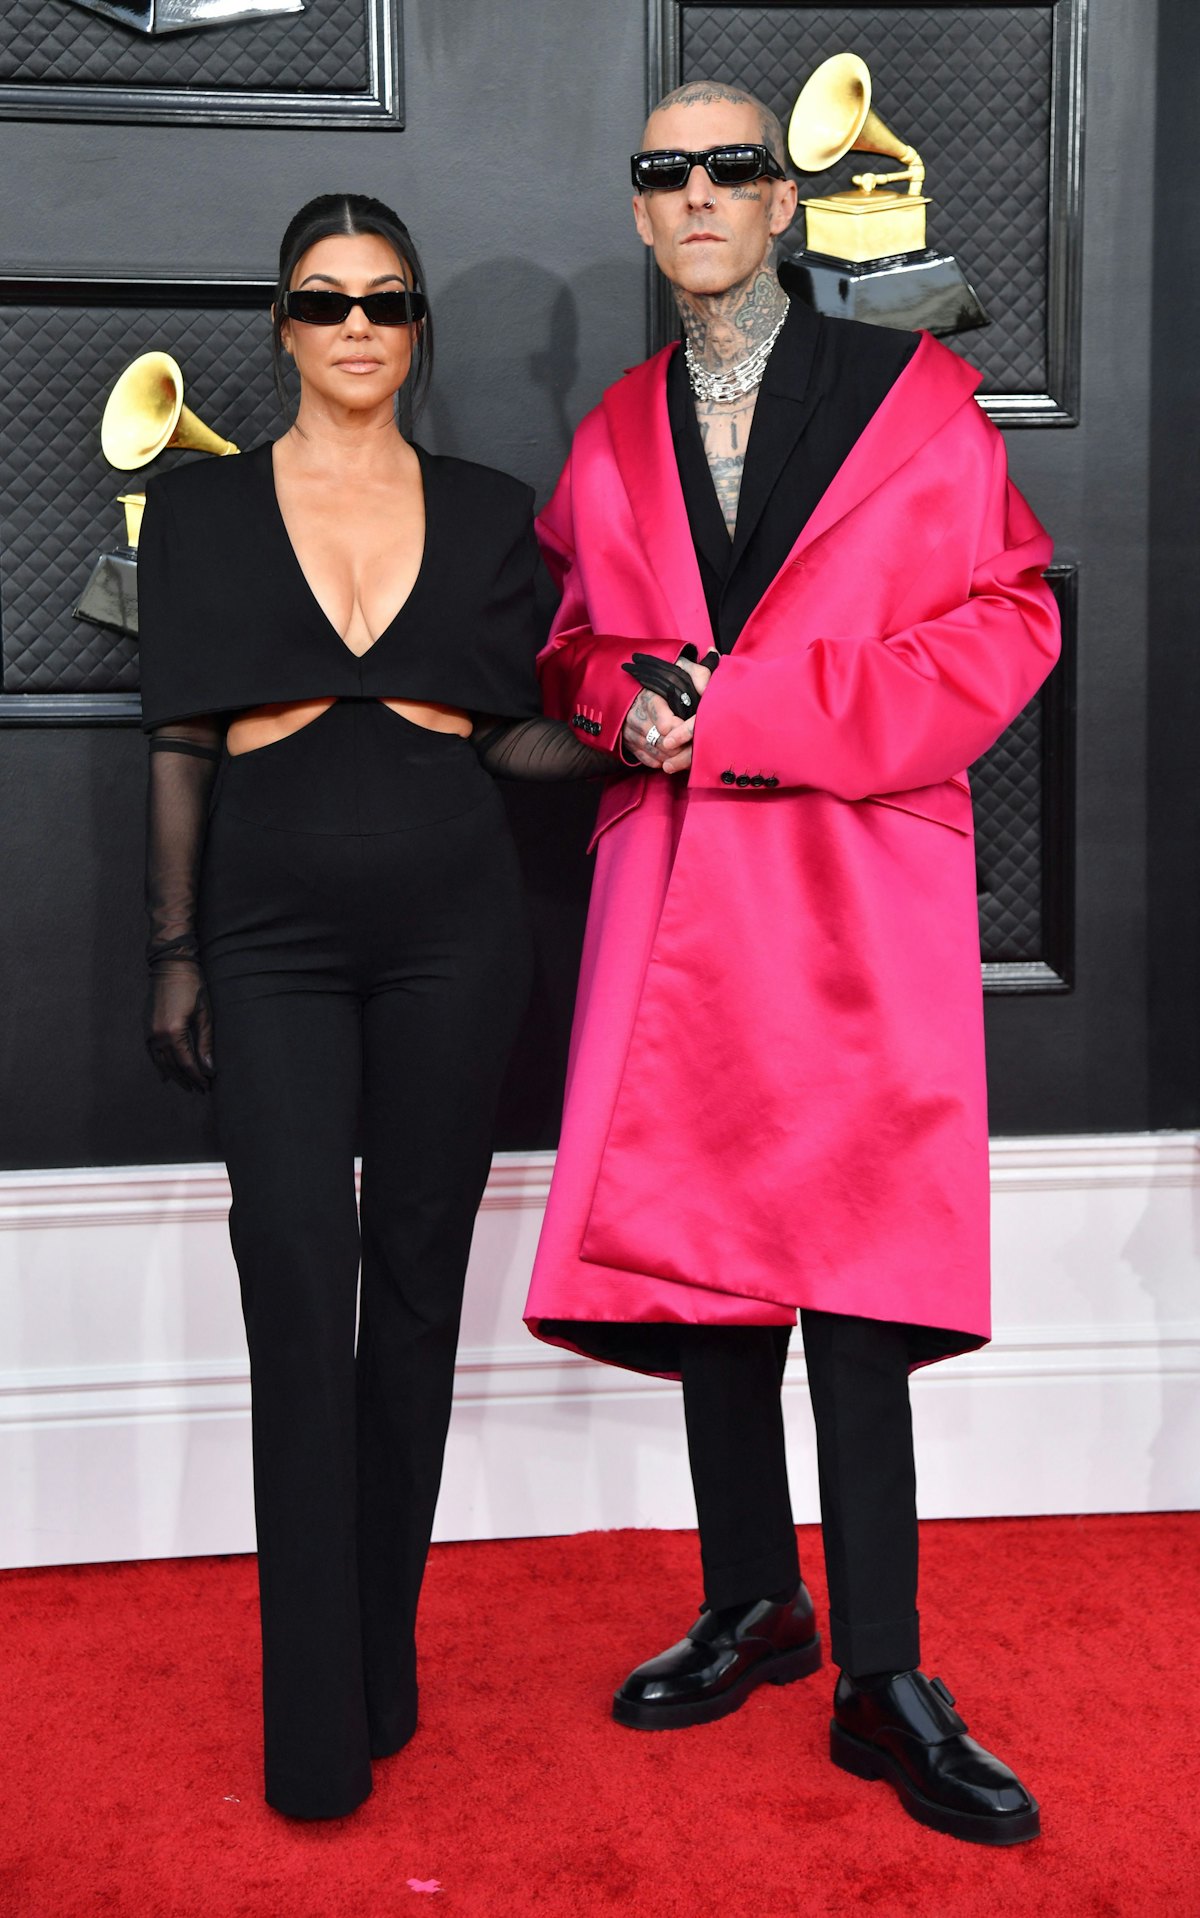 Kourtney Kardashian and musician Travis Barker arrive for the 64th Annual Grammy Awards at the MGM G...